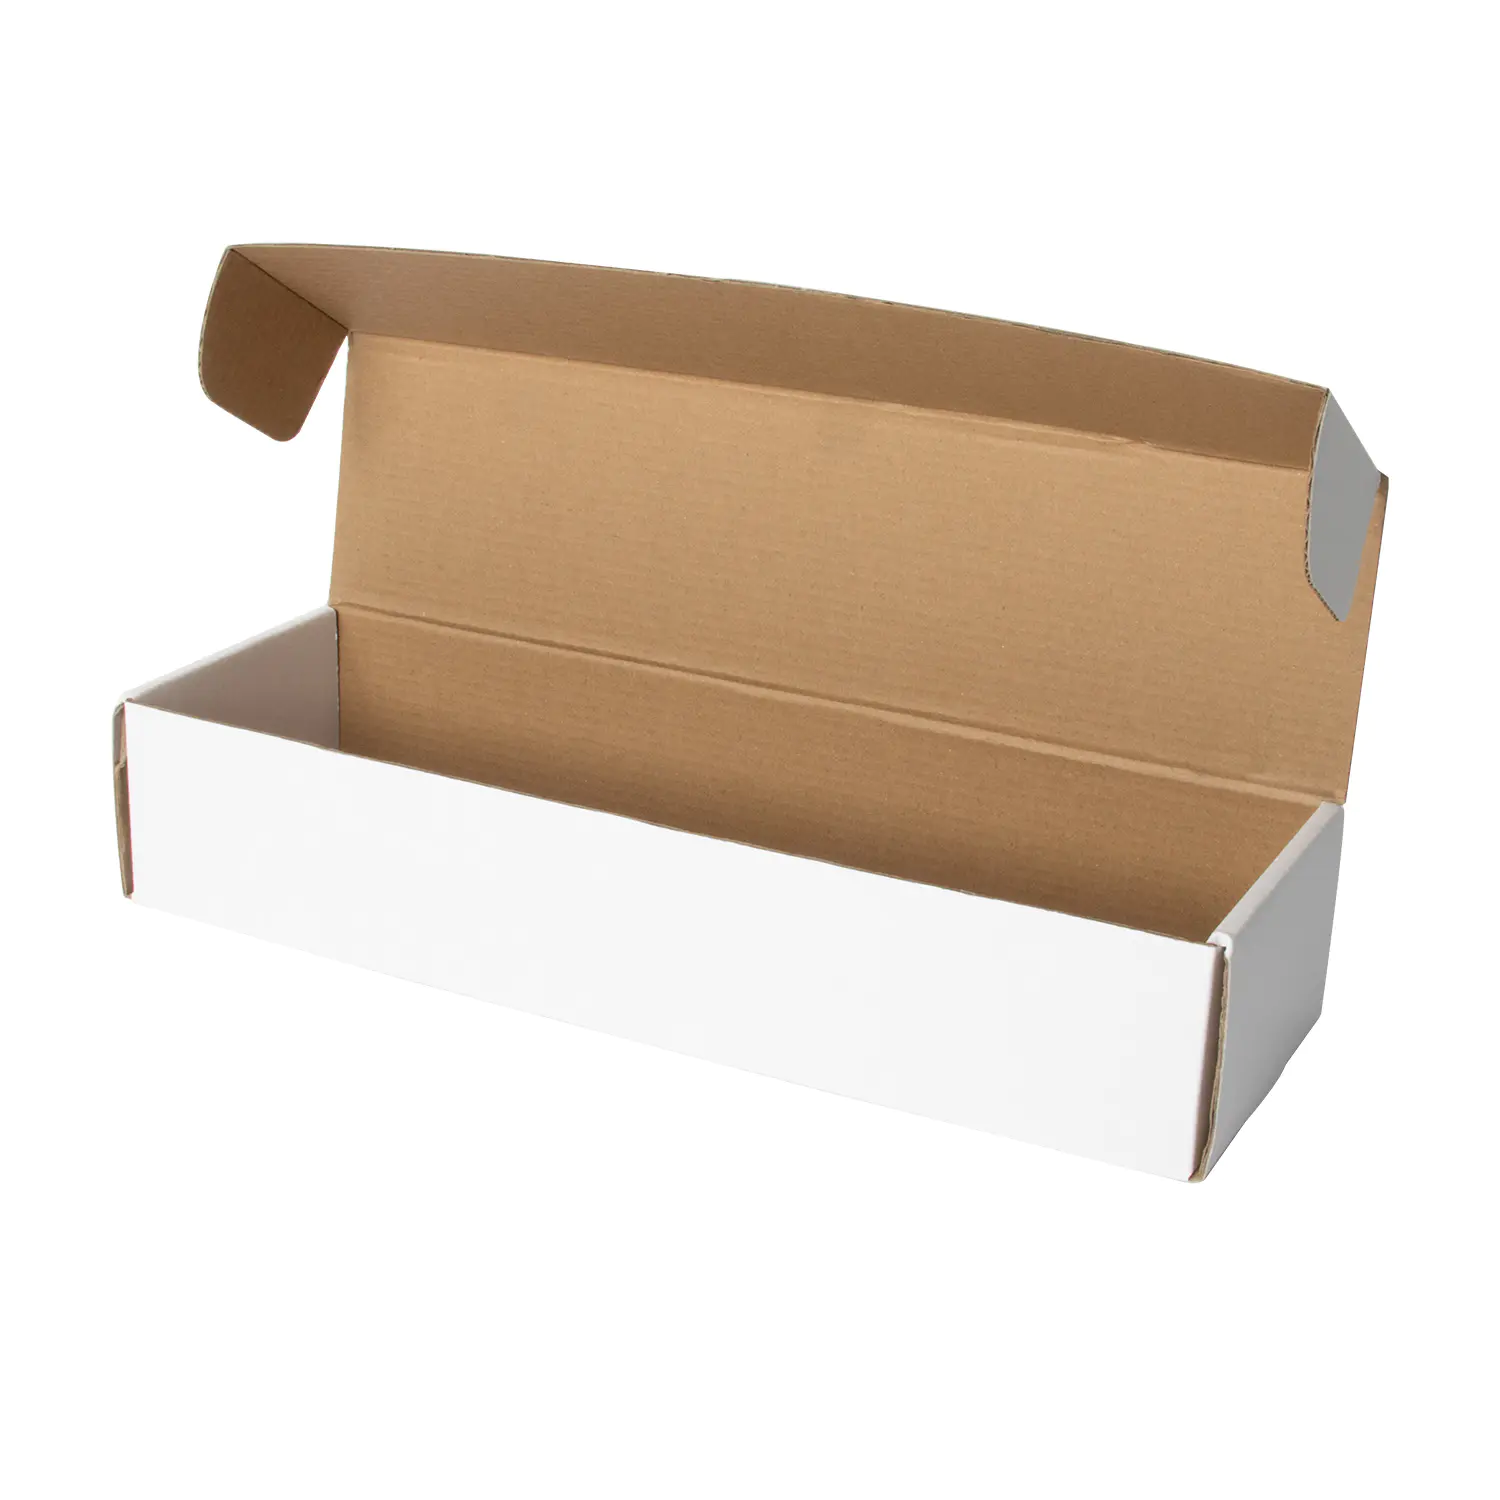 Trading Card Storage Box - 930 Count